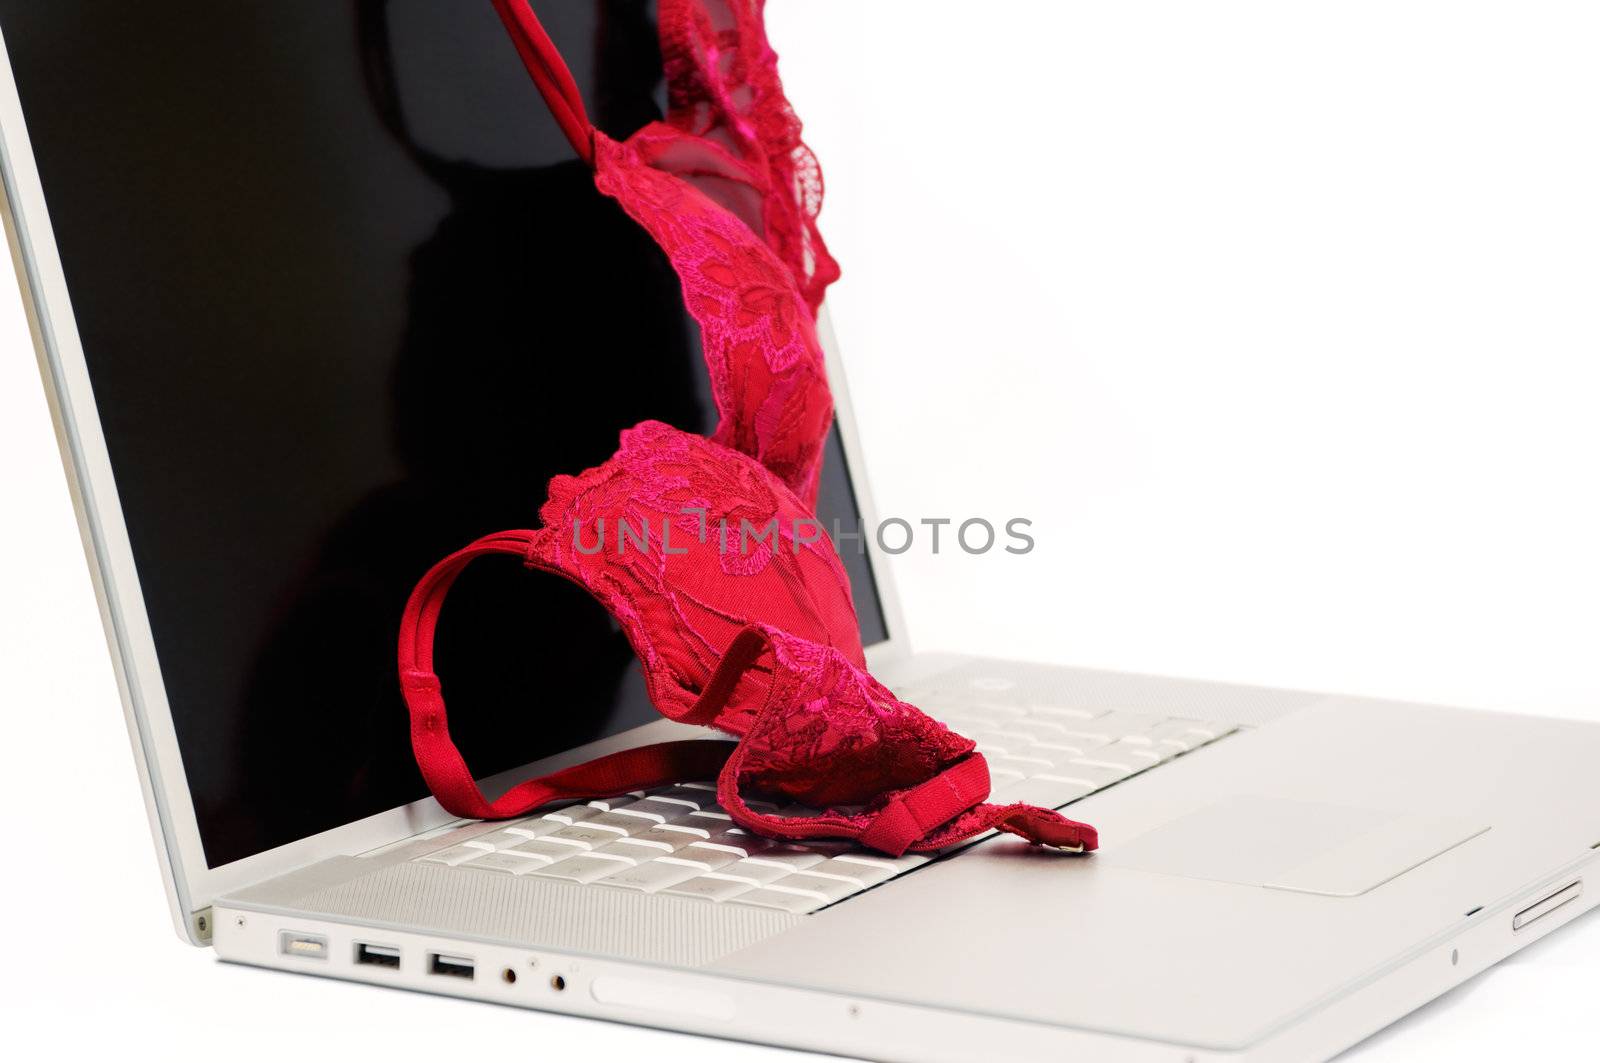 Red bra thrown on a modern laptop, against a white background. Room for text